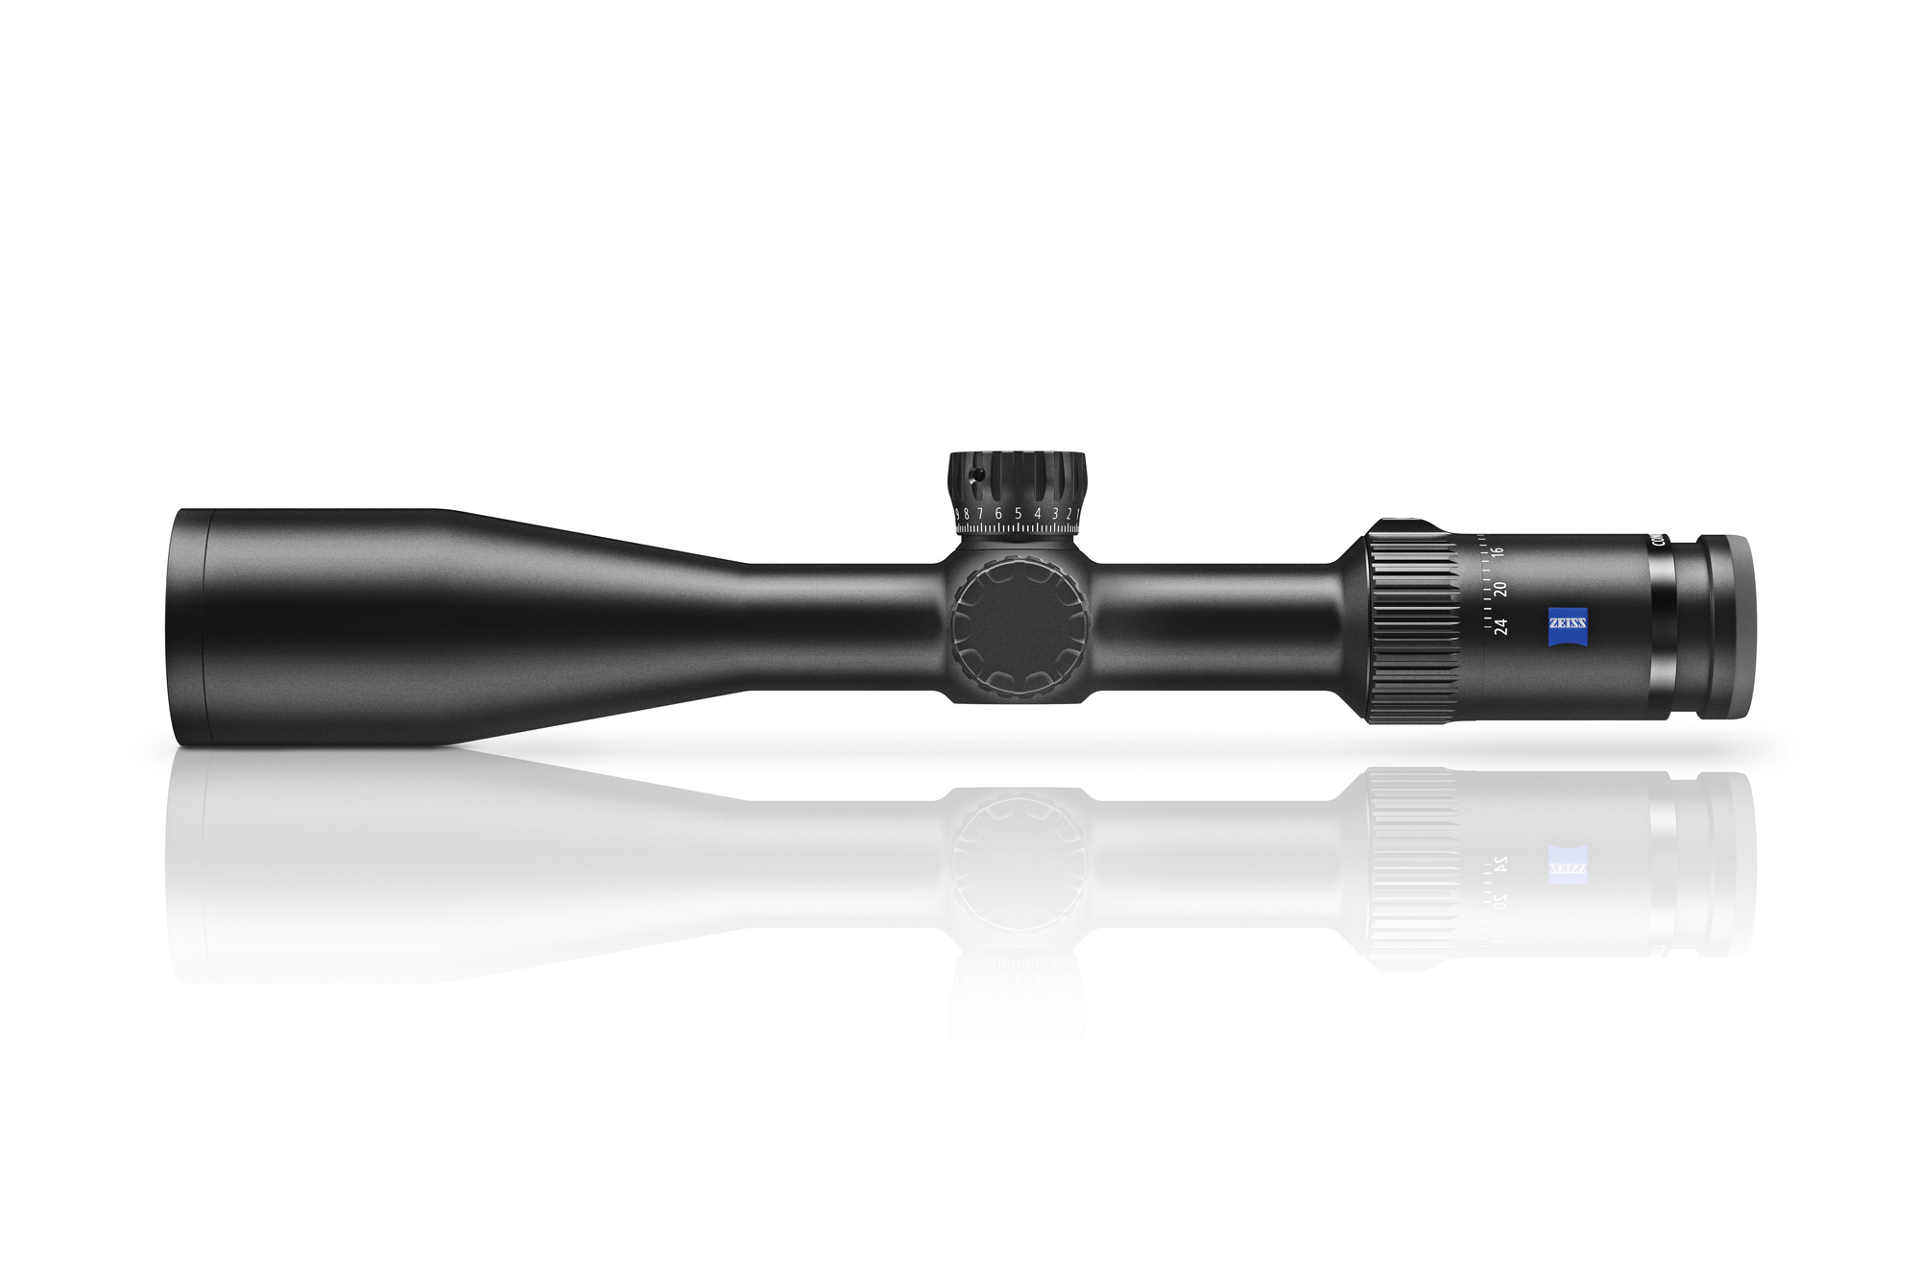 ZEISS Conquest V4 6-24x50 | High-quality optics for rugged hunting use